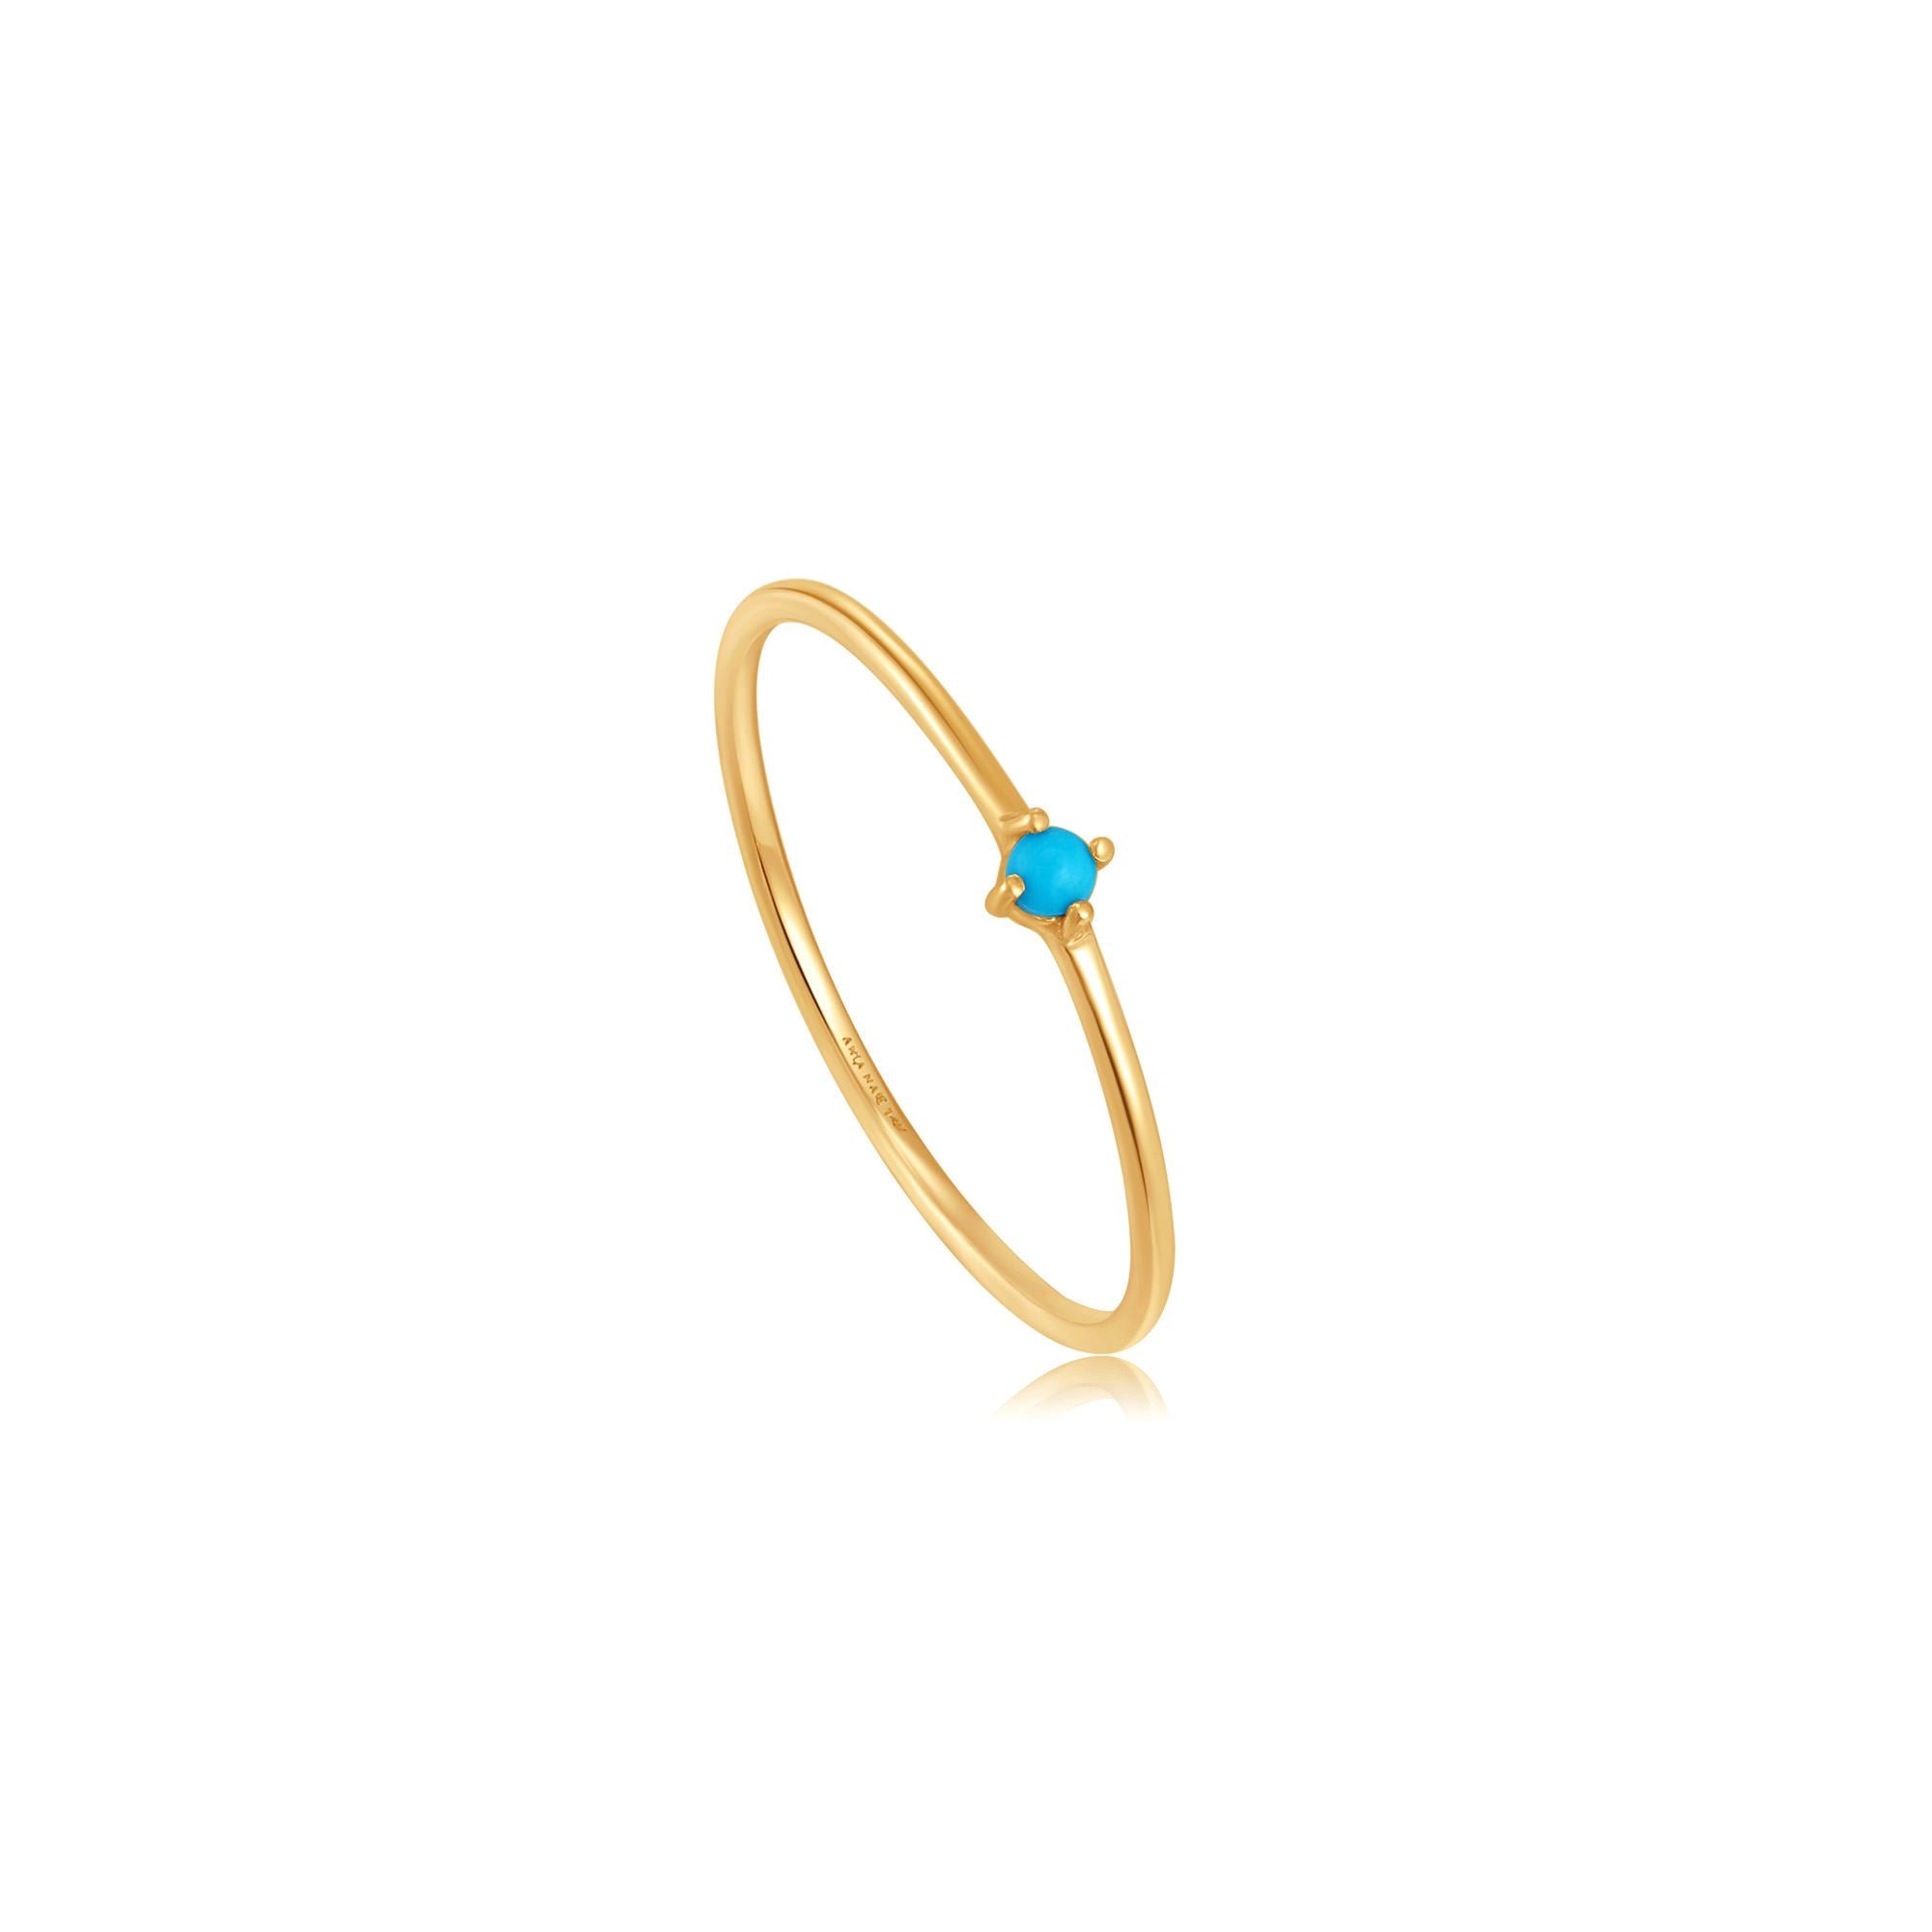 Ania Haie 14ct Gold Turquoise Stone Ring